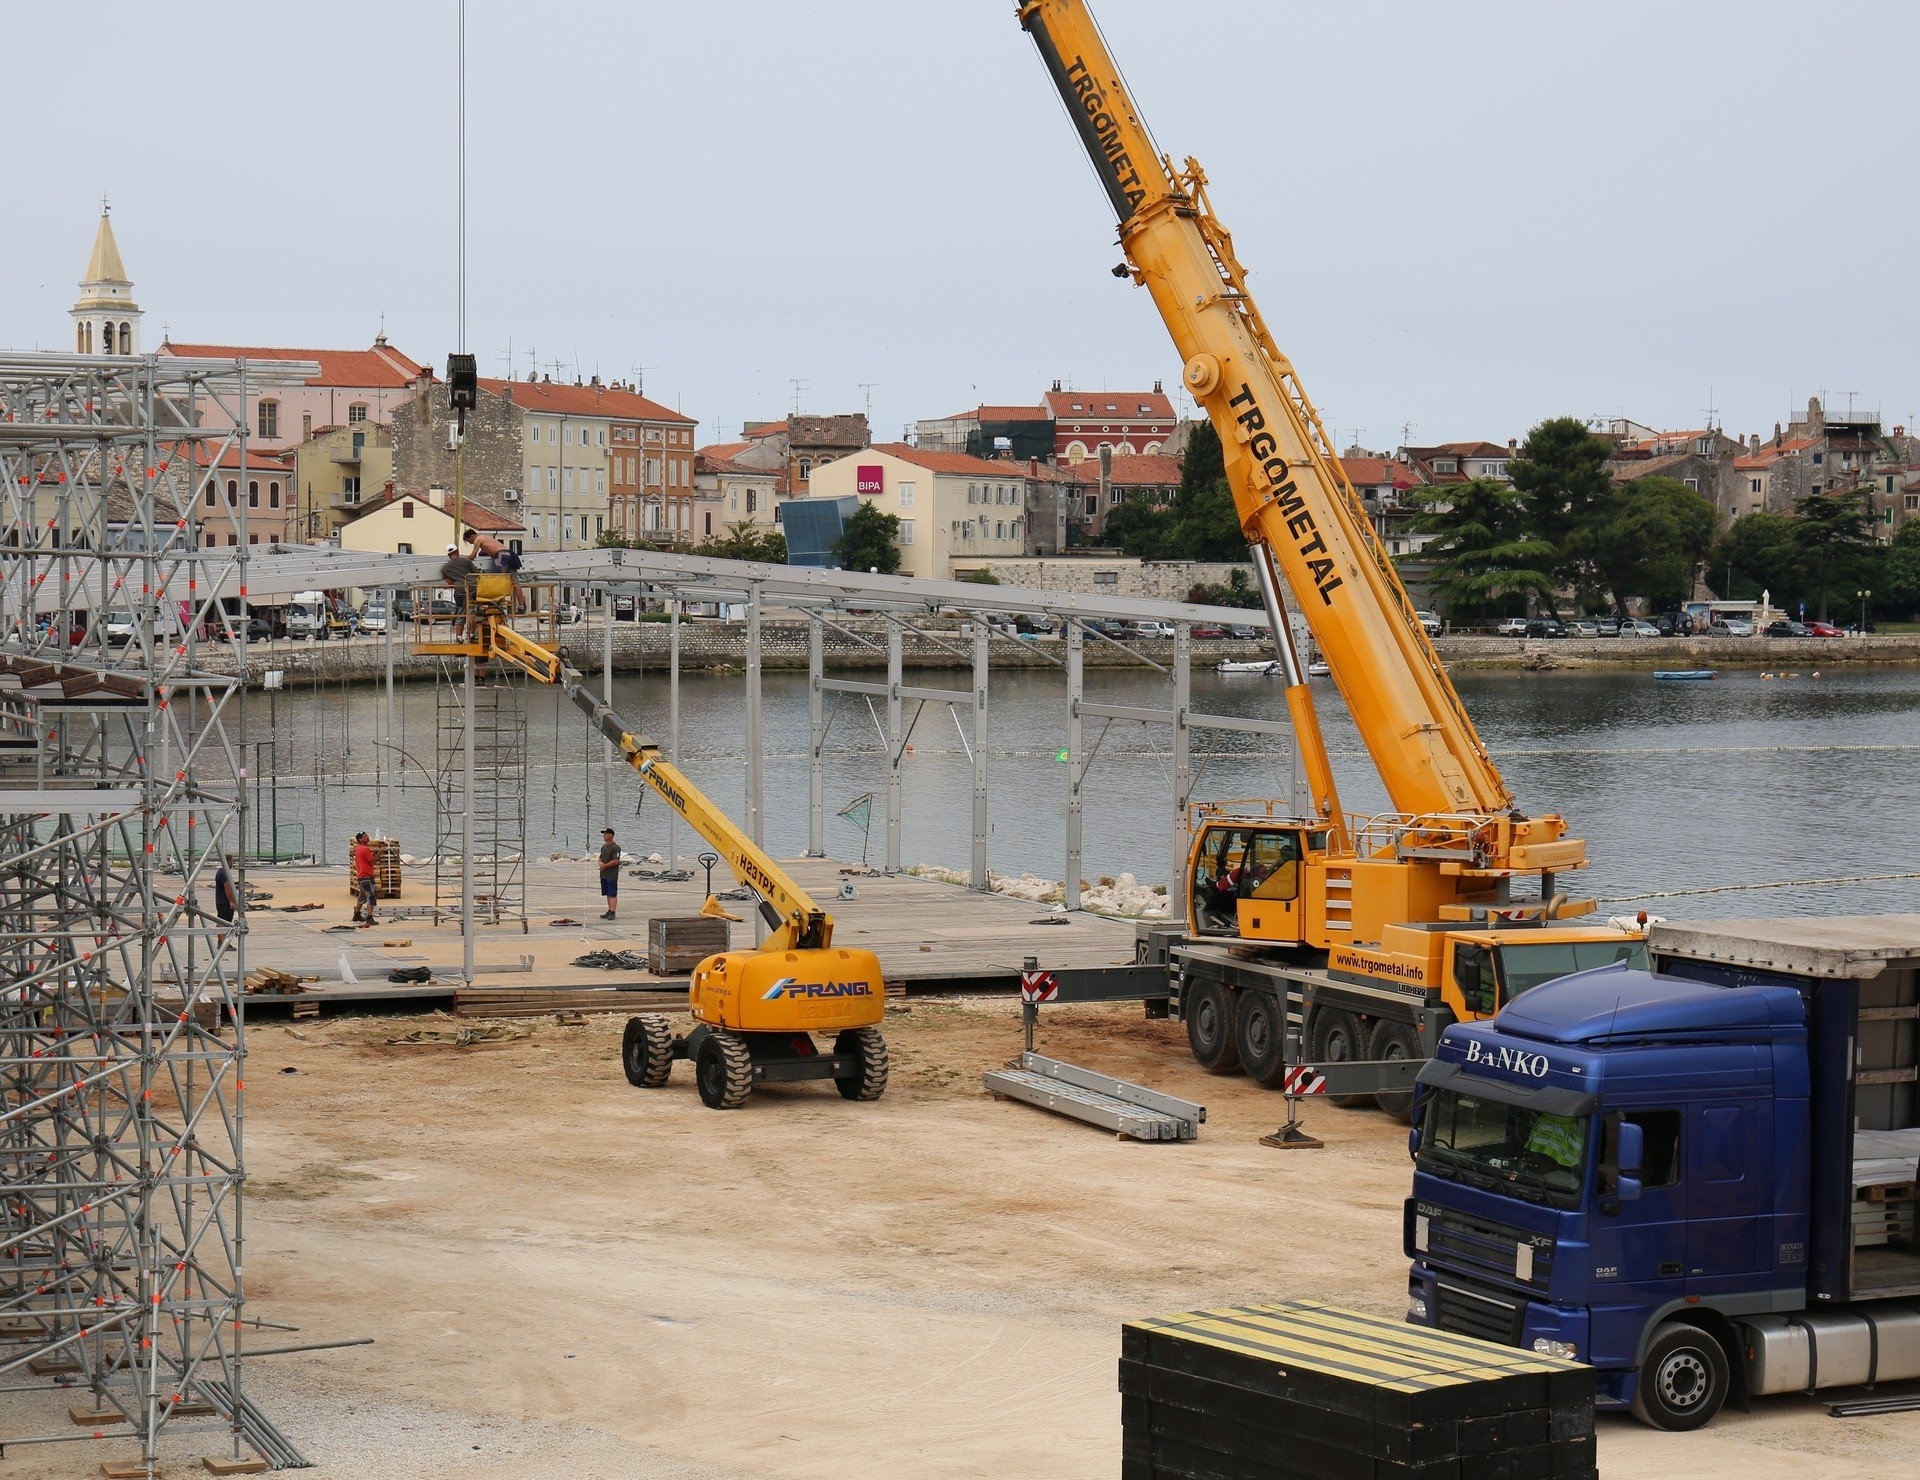 Work is under way to complete the Red Bull Beach Arena. Photocredit: Swatch Major Series